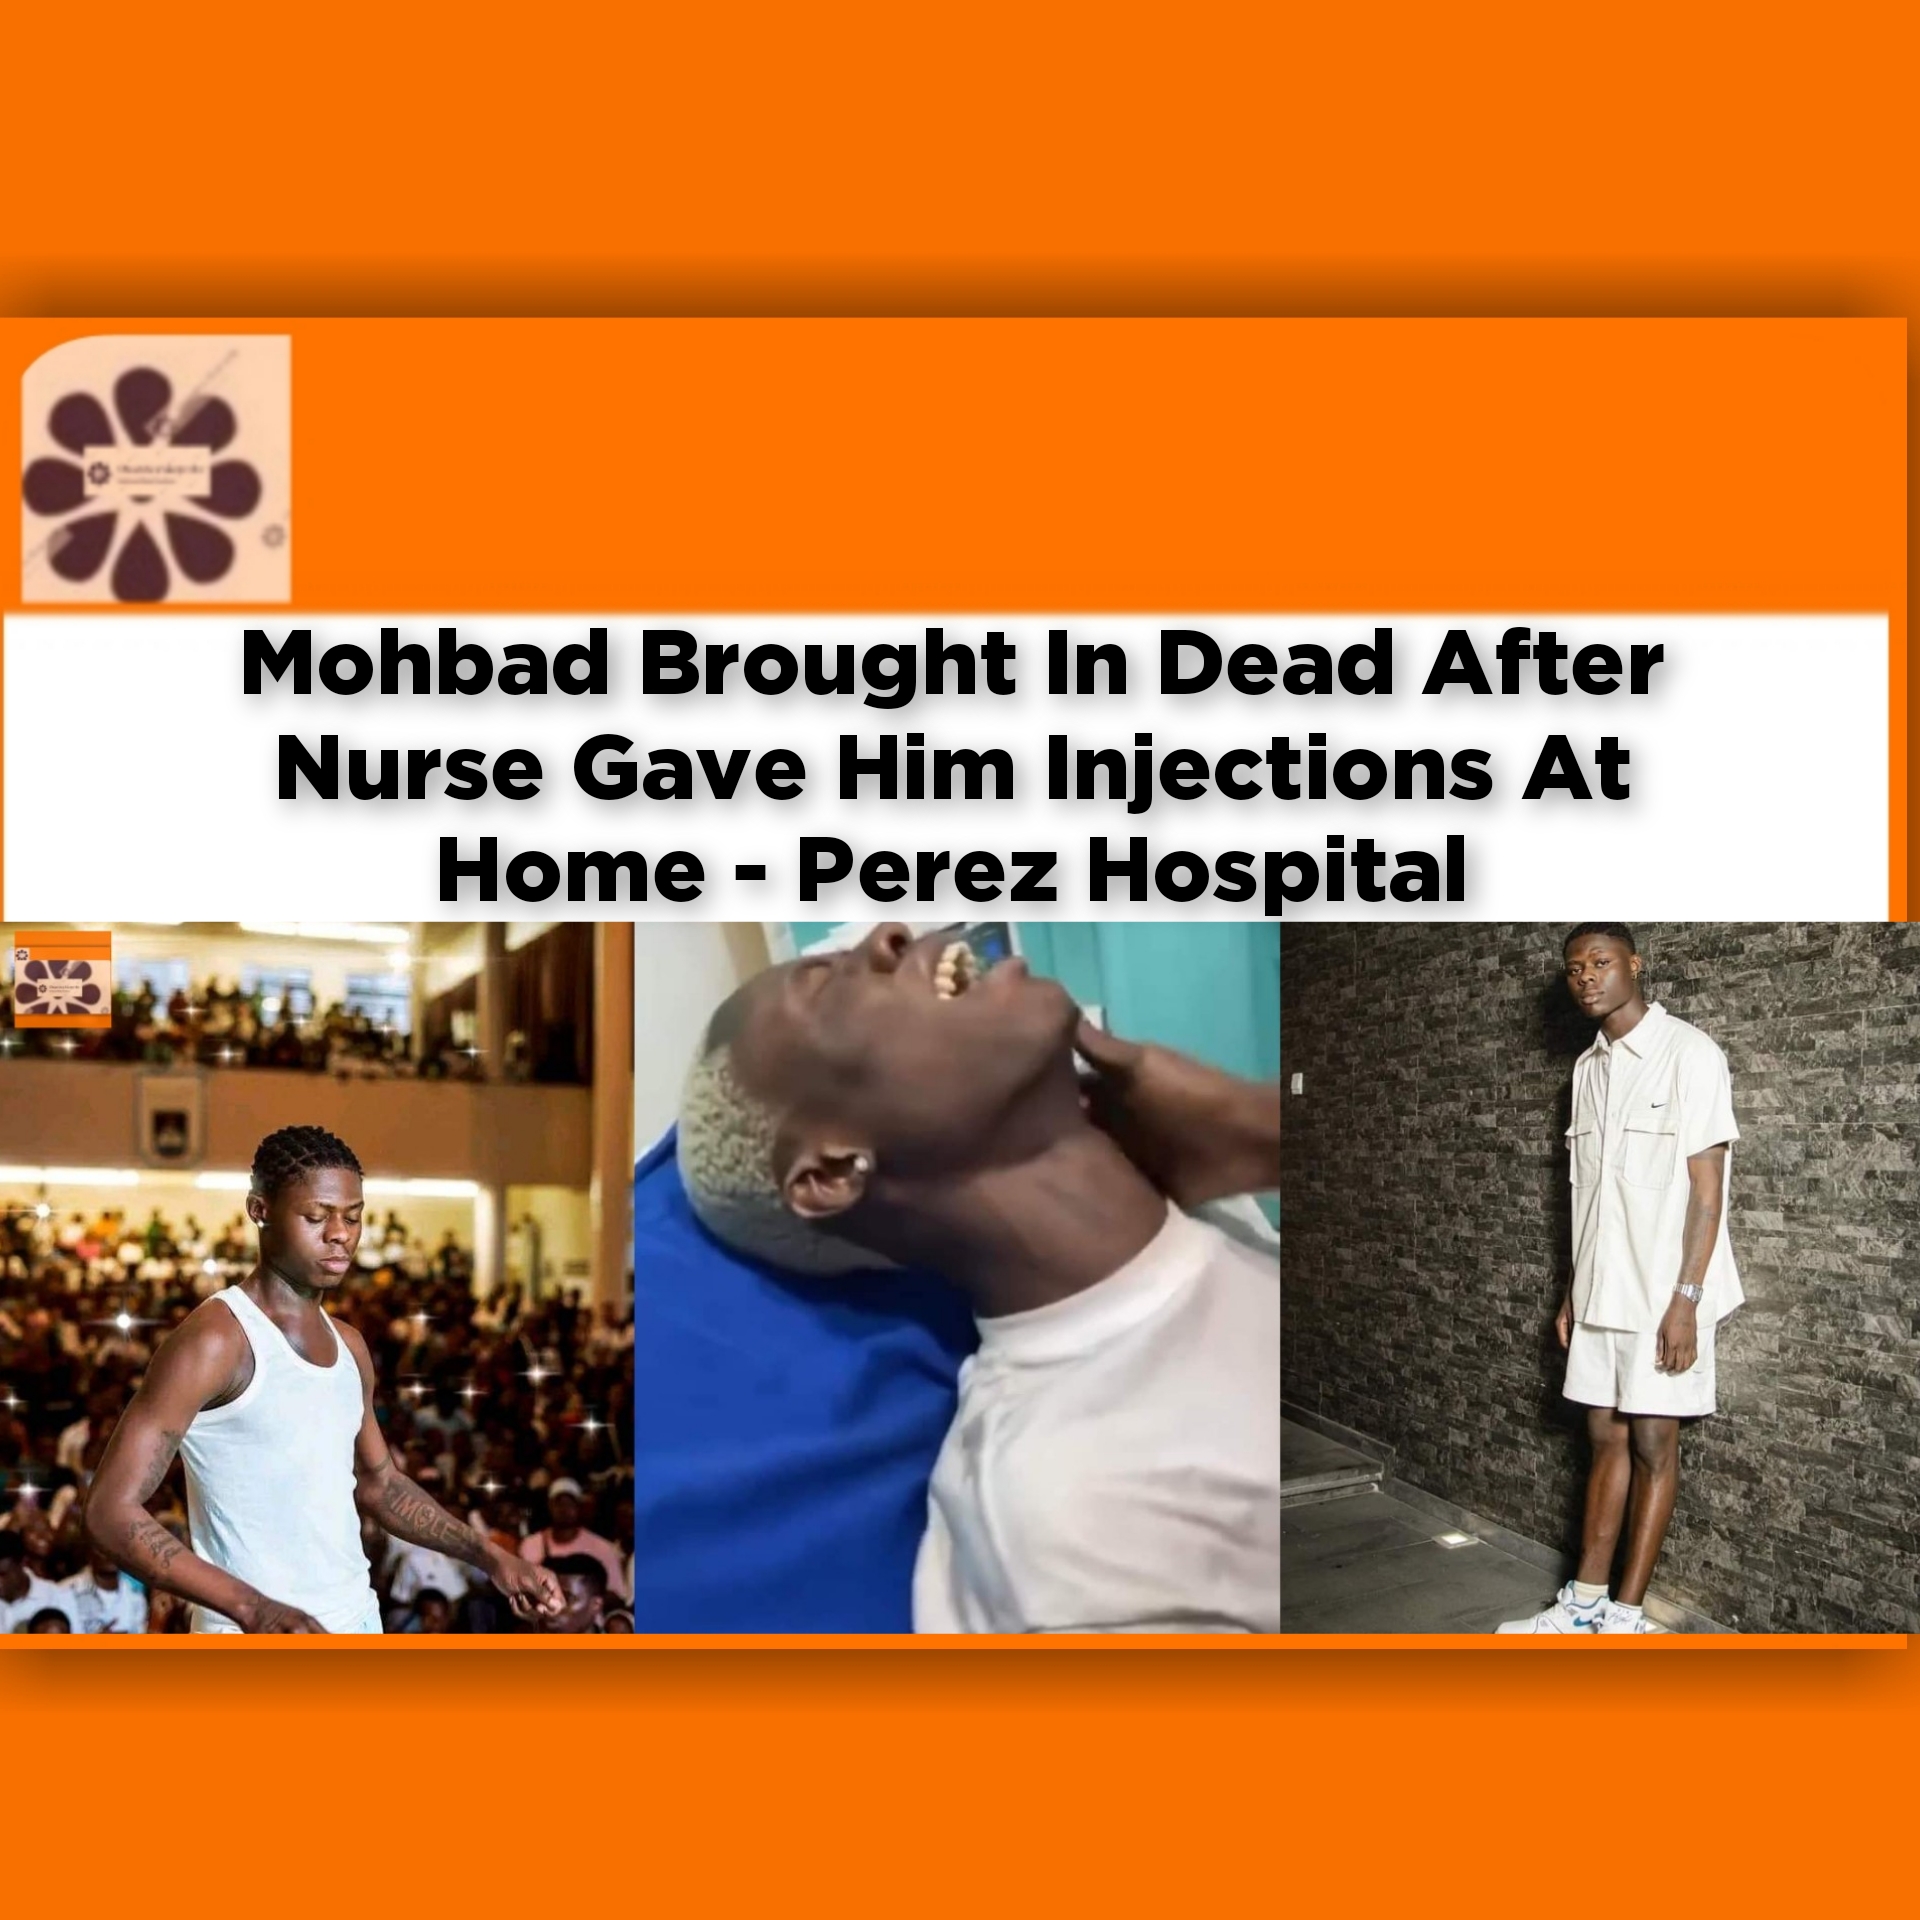 Mohbad Brought In Dead After Nurse Gave Him Injections At Home - Perez Hospital ~ OsazuwaAkonedo #Russia